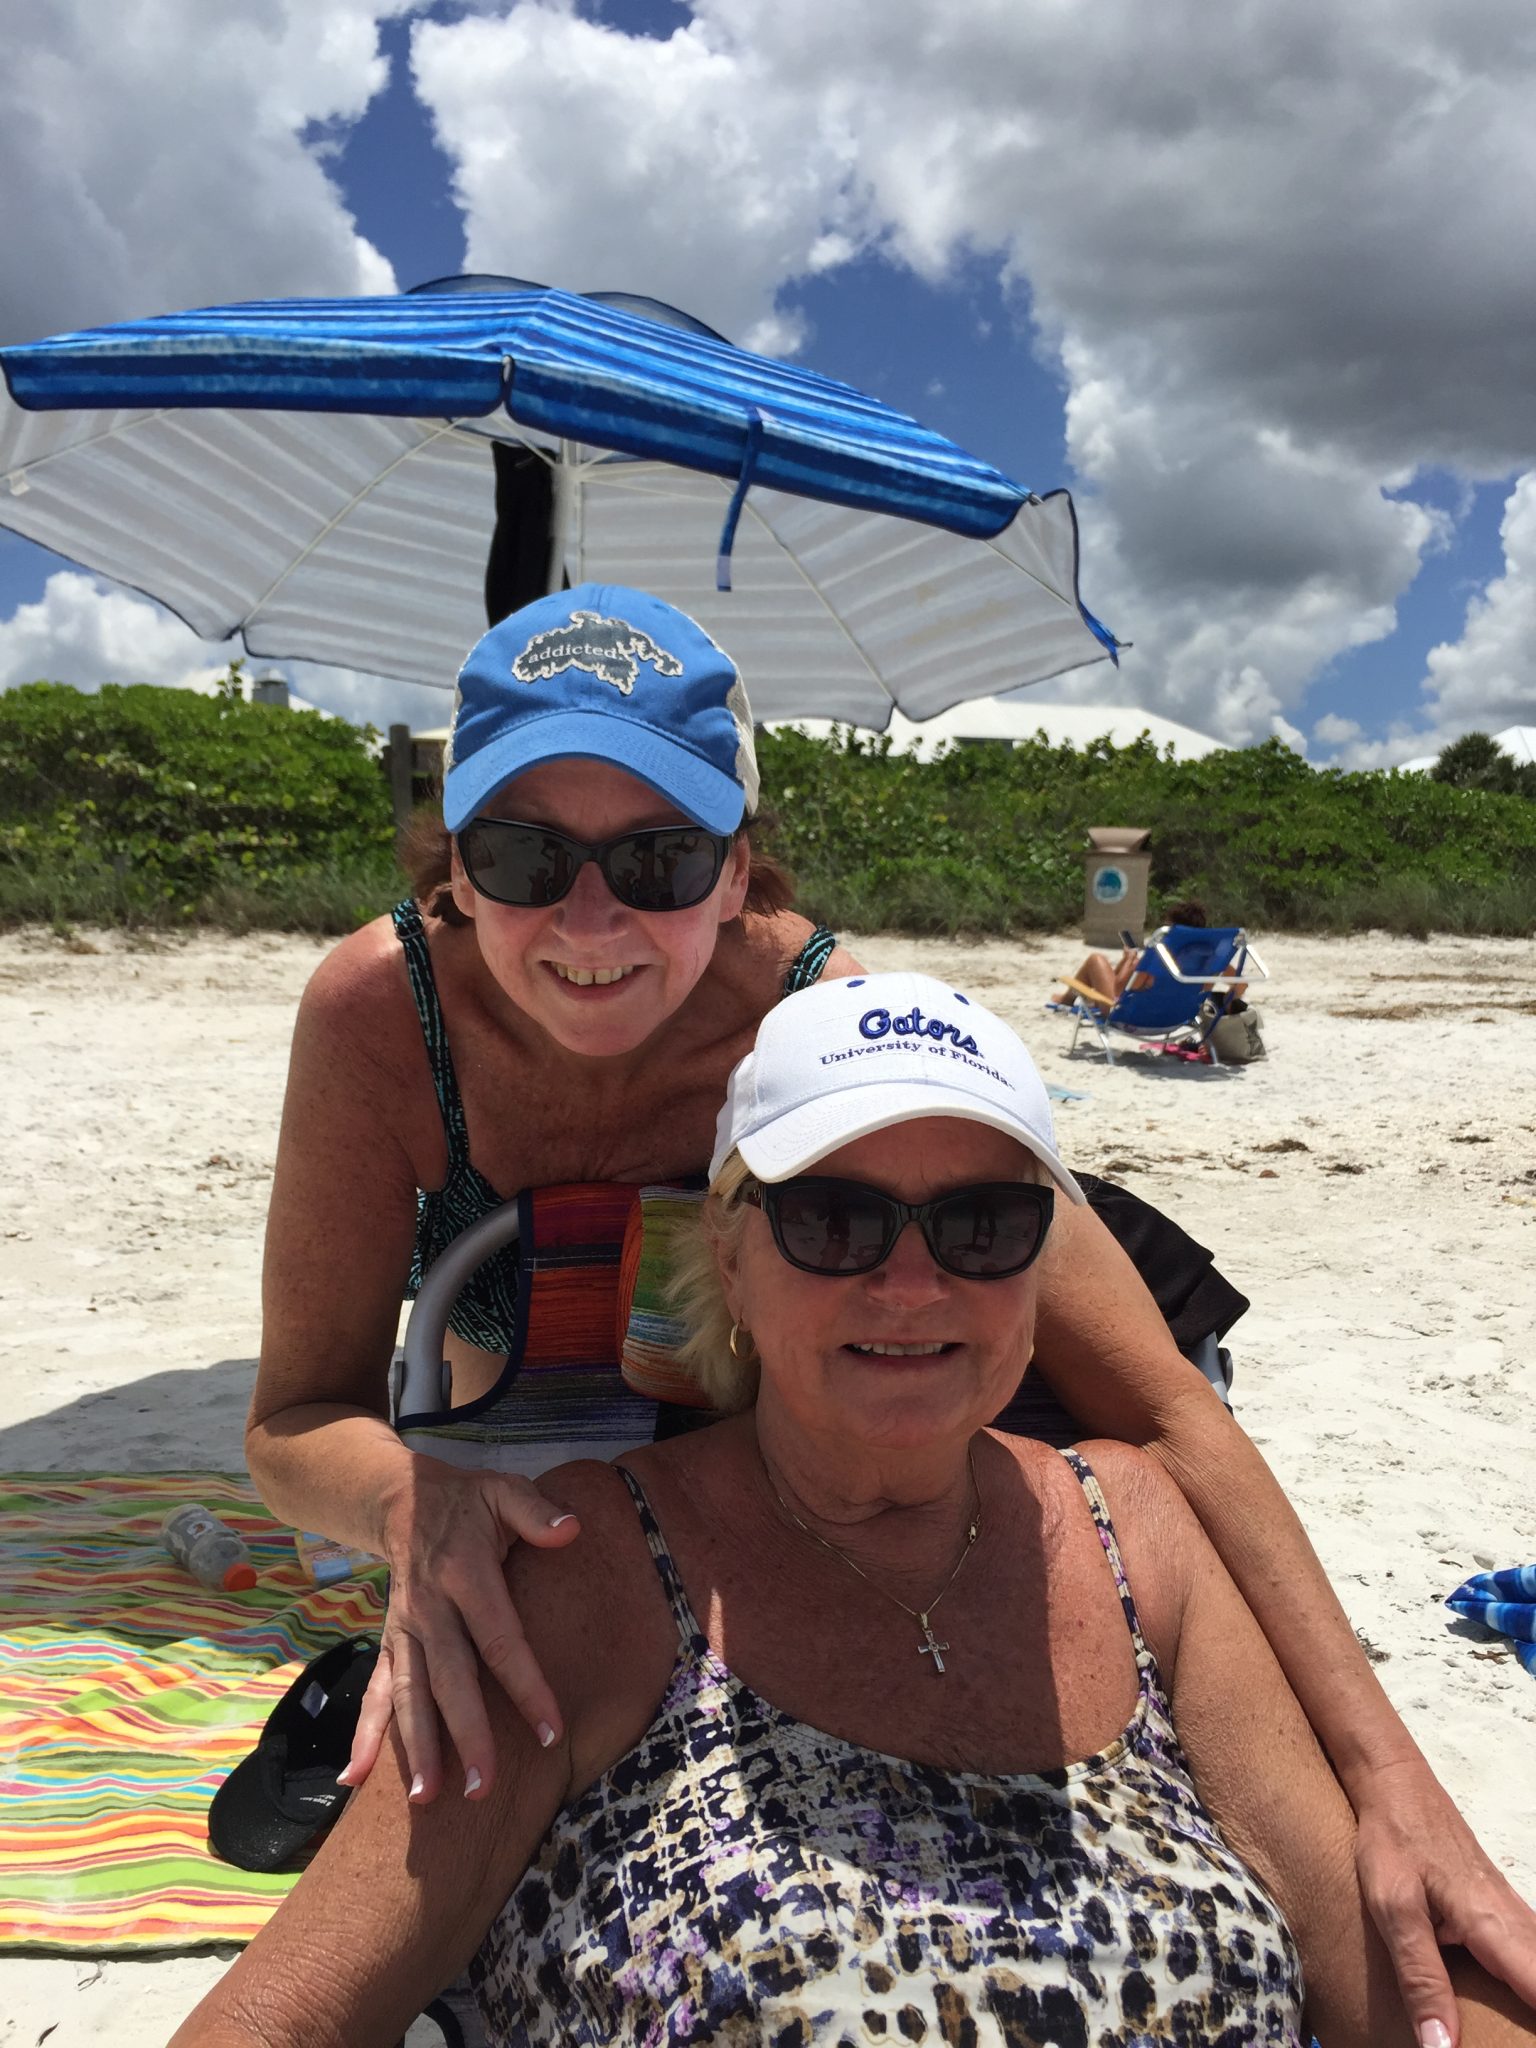 Me and my sissy Jan at the beach in Naples. One of her happiest places. I will carry your heart in my heart ❤️